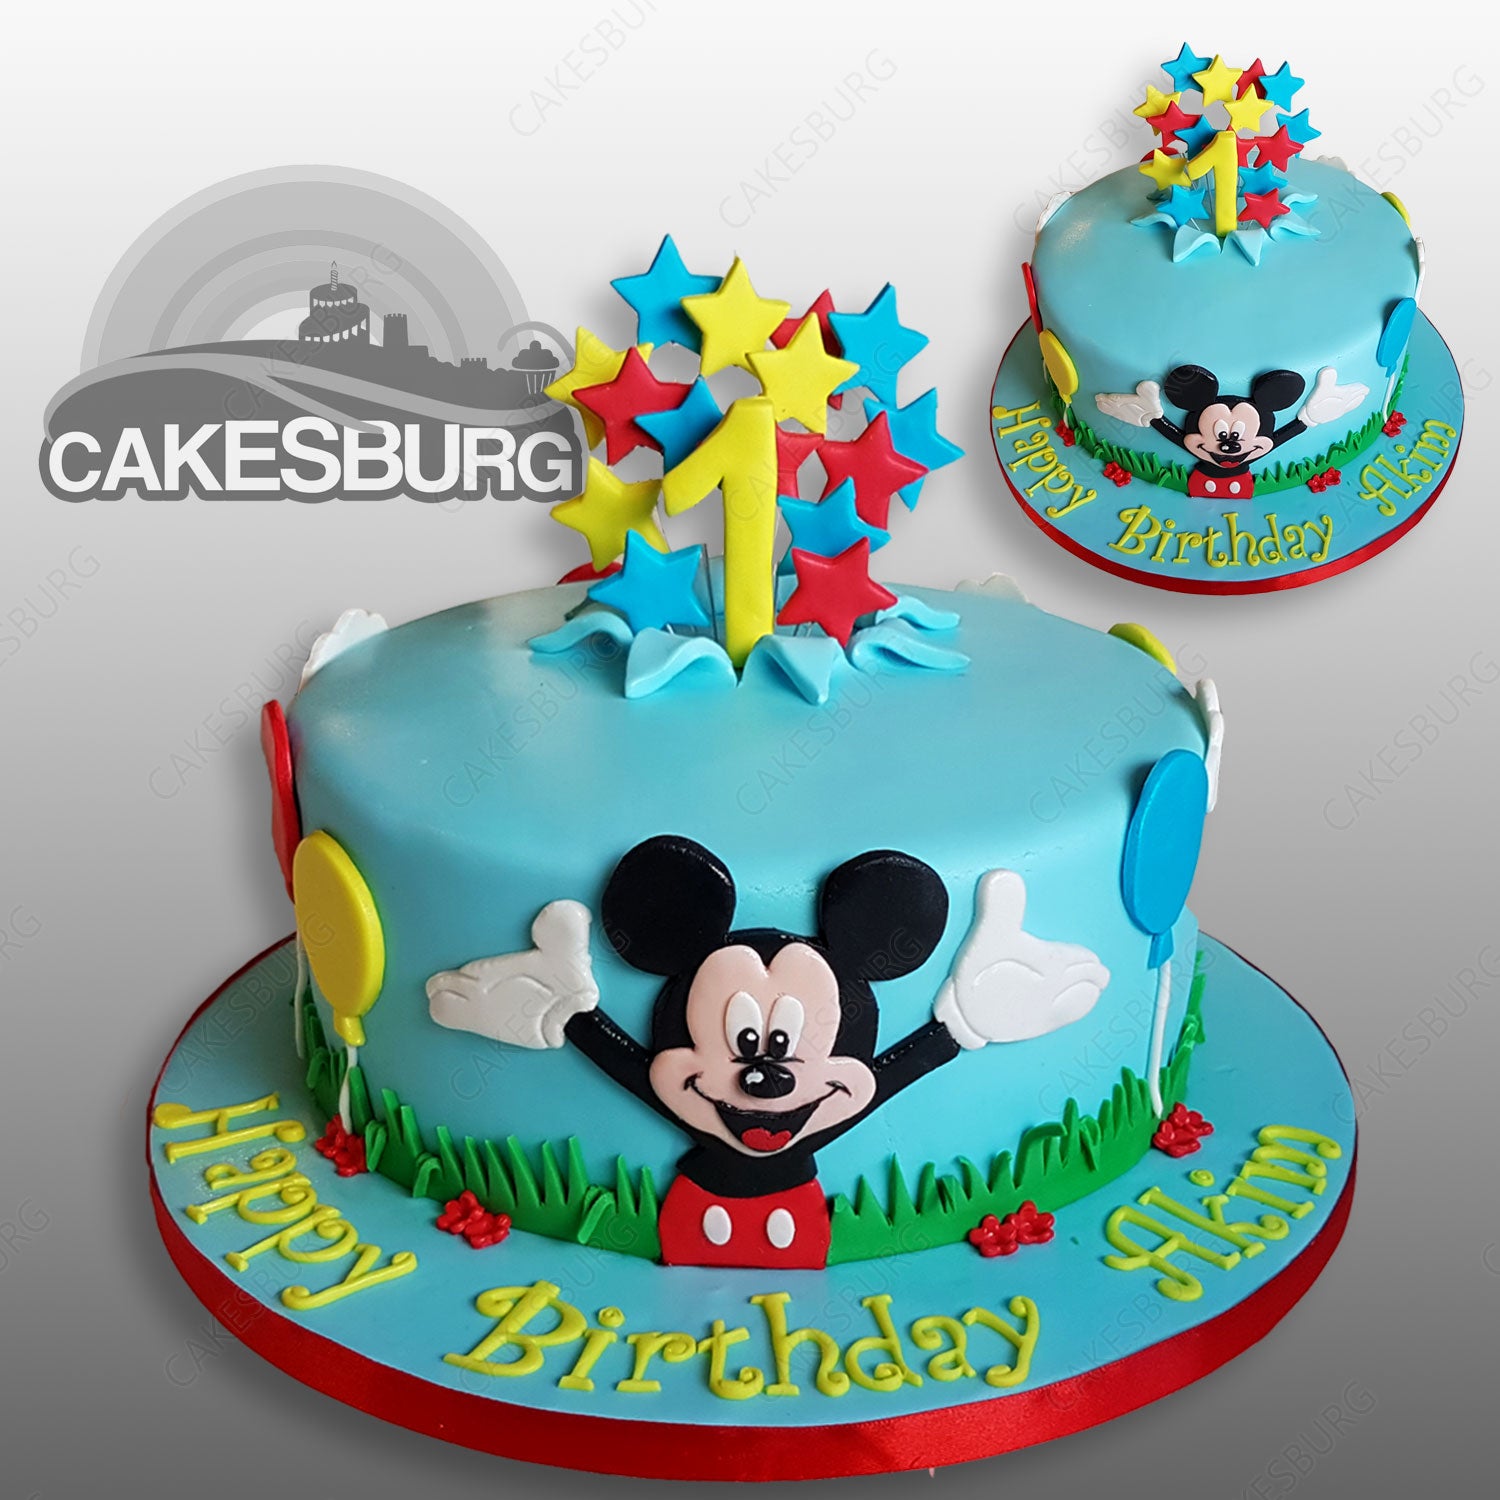 Mickey Mouse First Birthday Cake | Lucienne Curmi | Flickr